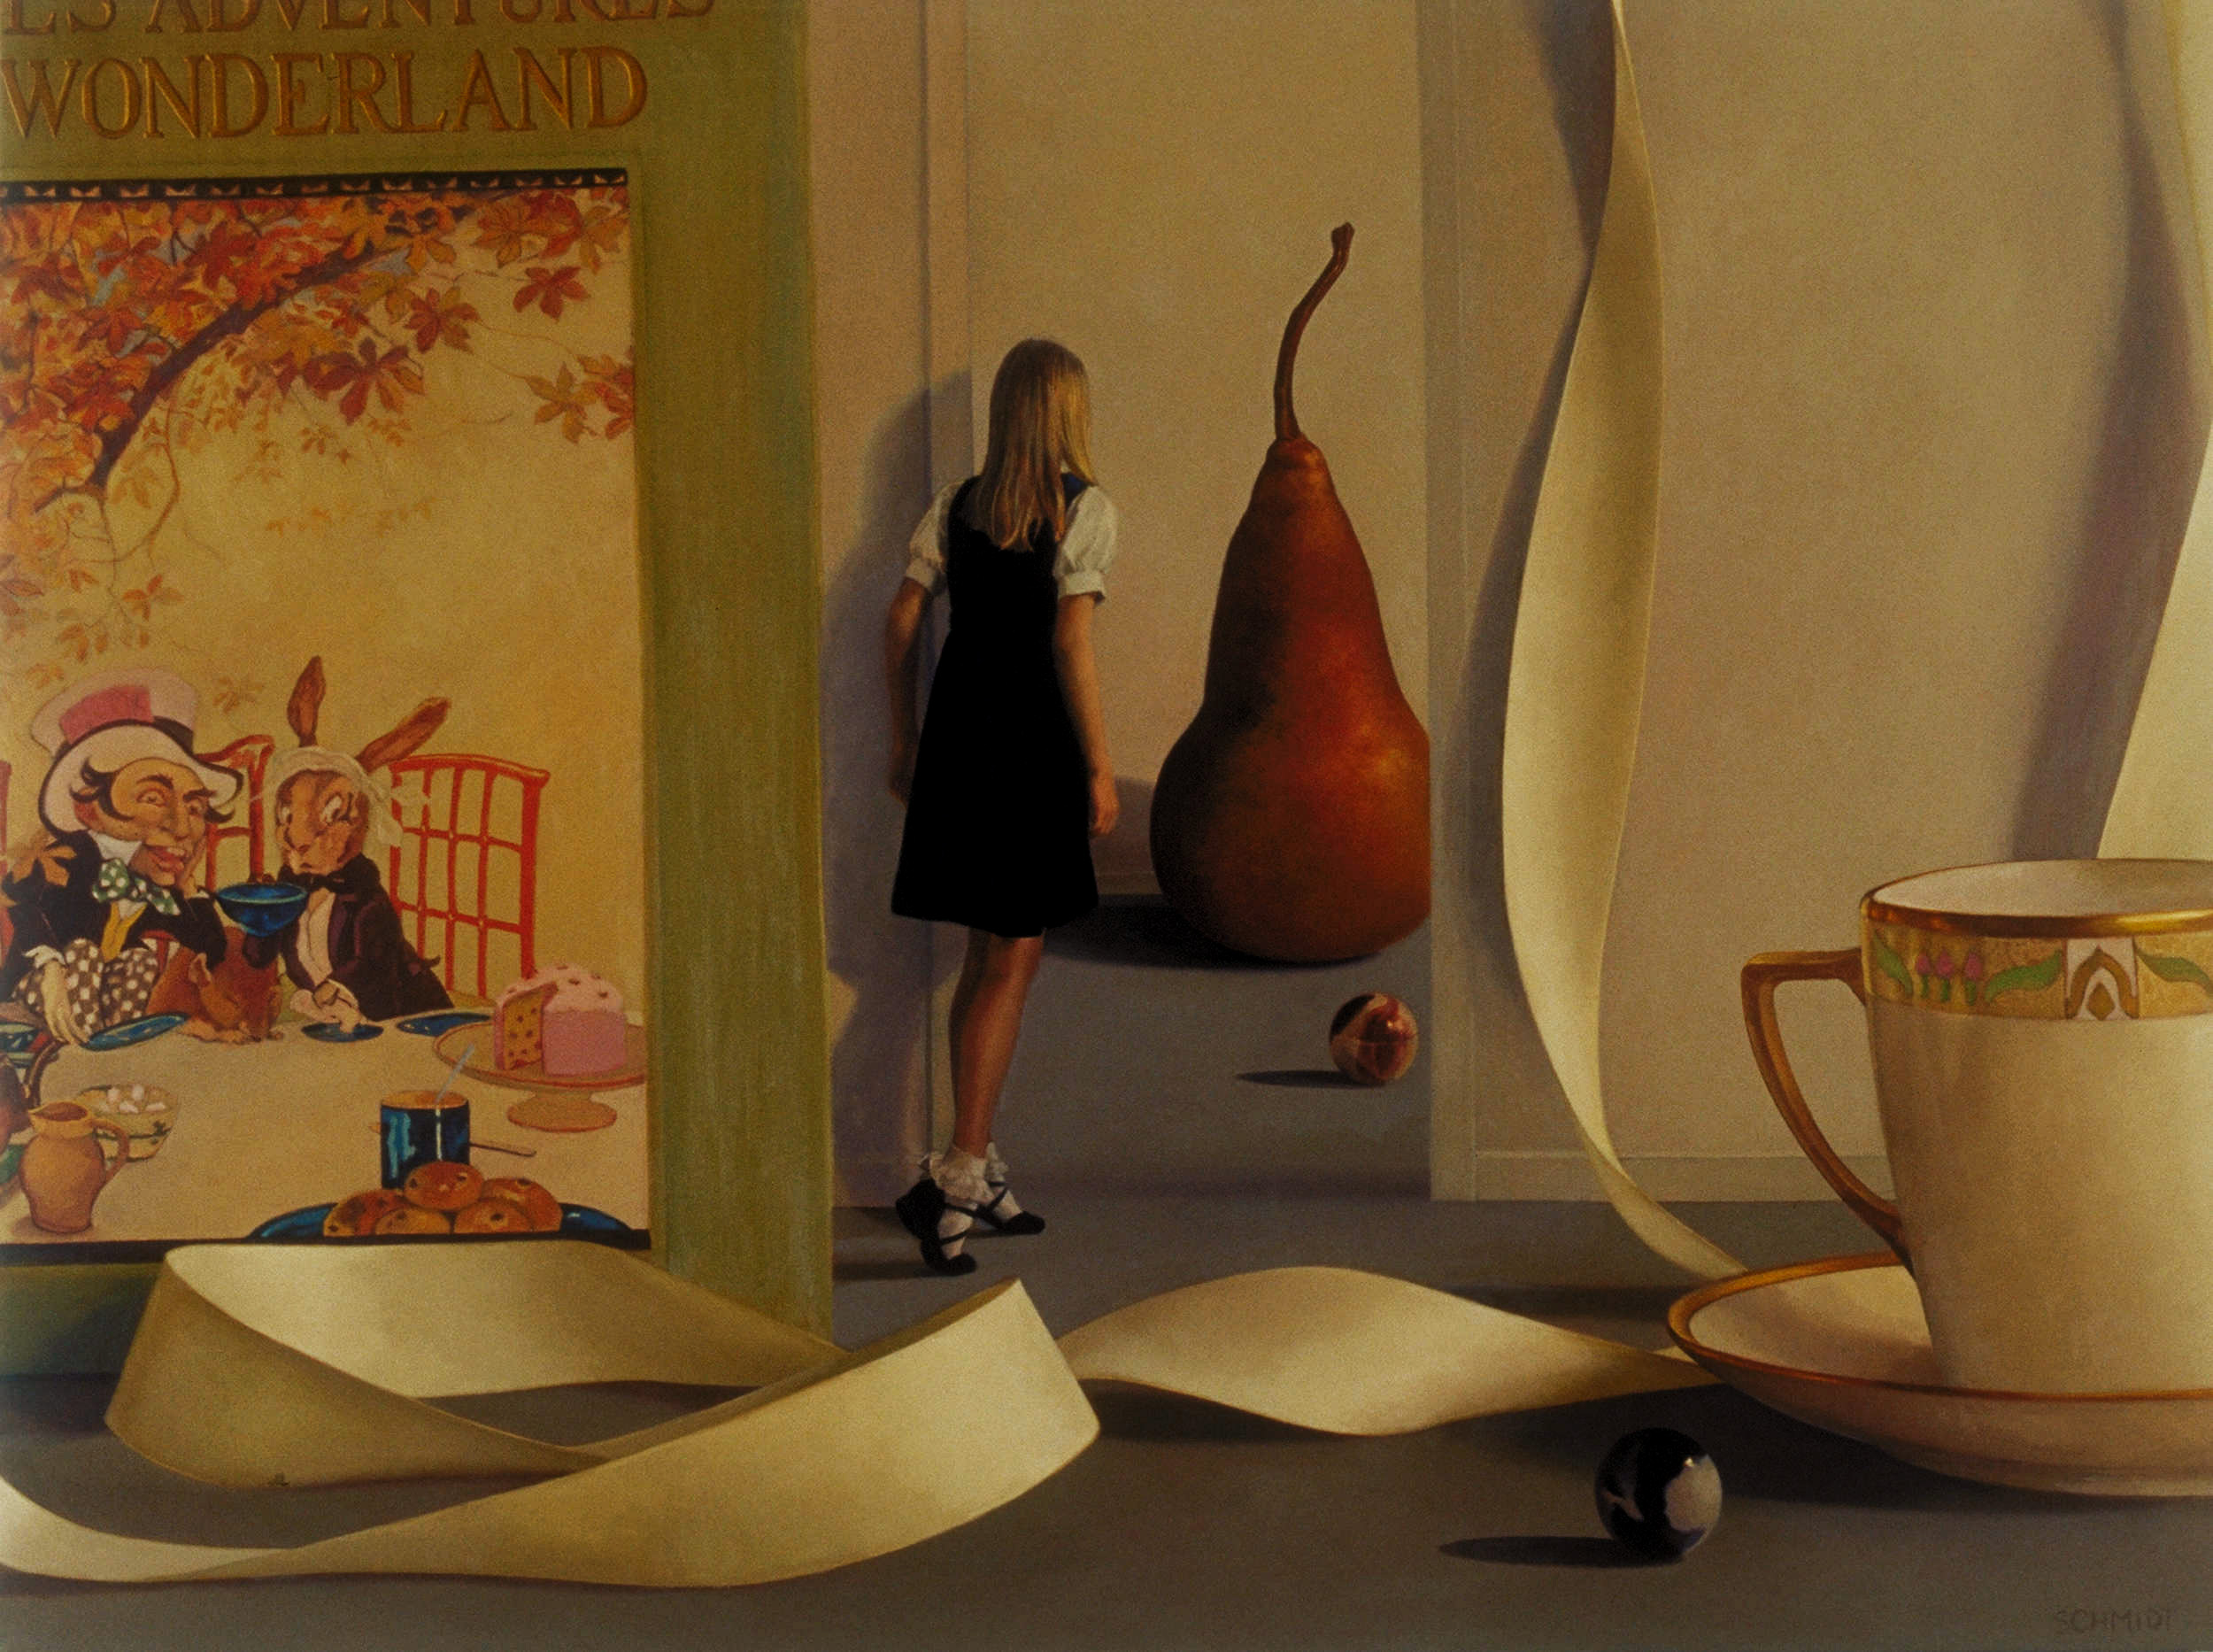 Alice in Wonderland book cover, giant pears, little girl looking into another room through a door, marbles, teacup, ribbon